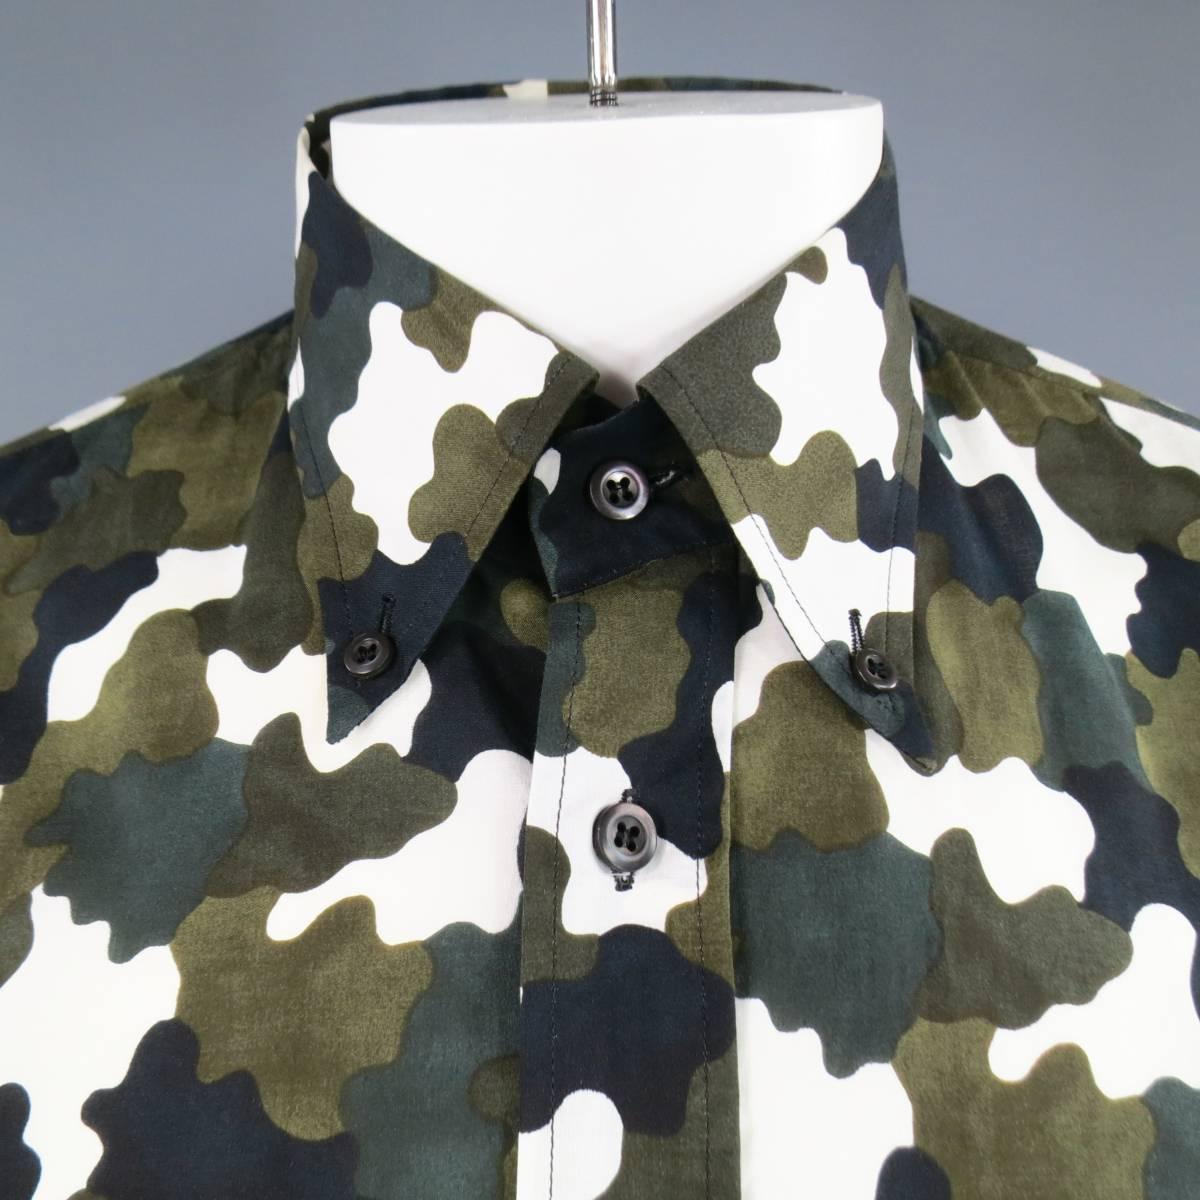 This fitted  PRADA dress shirt comes in graphic olive green, black, and white high contrast camouflage print with a pointed button down collar and double patch flap pockets. Made in Italy.
 
Excellent Pre-Owned Condition.
Marked: 41/16
